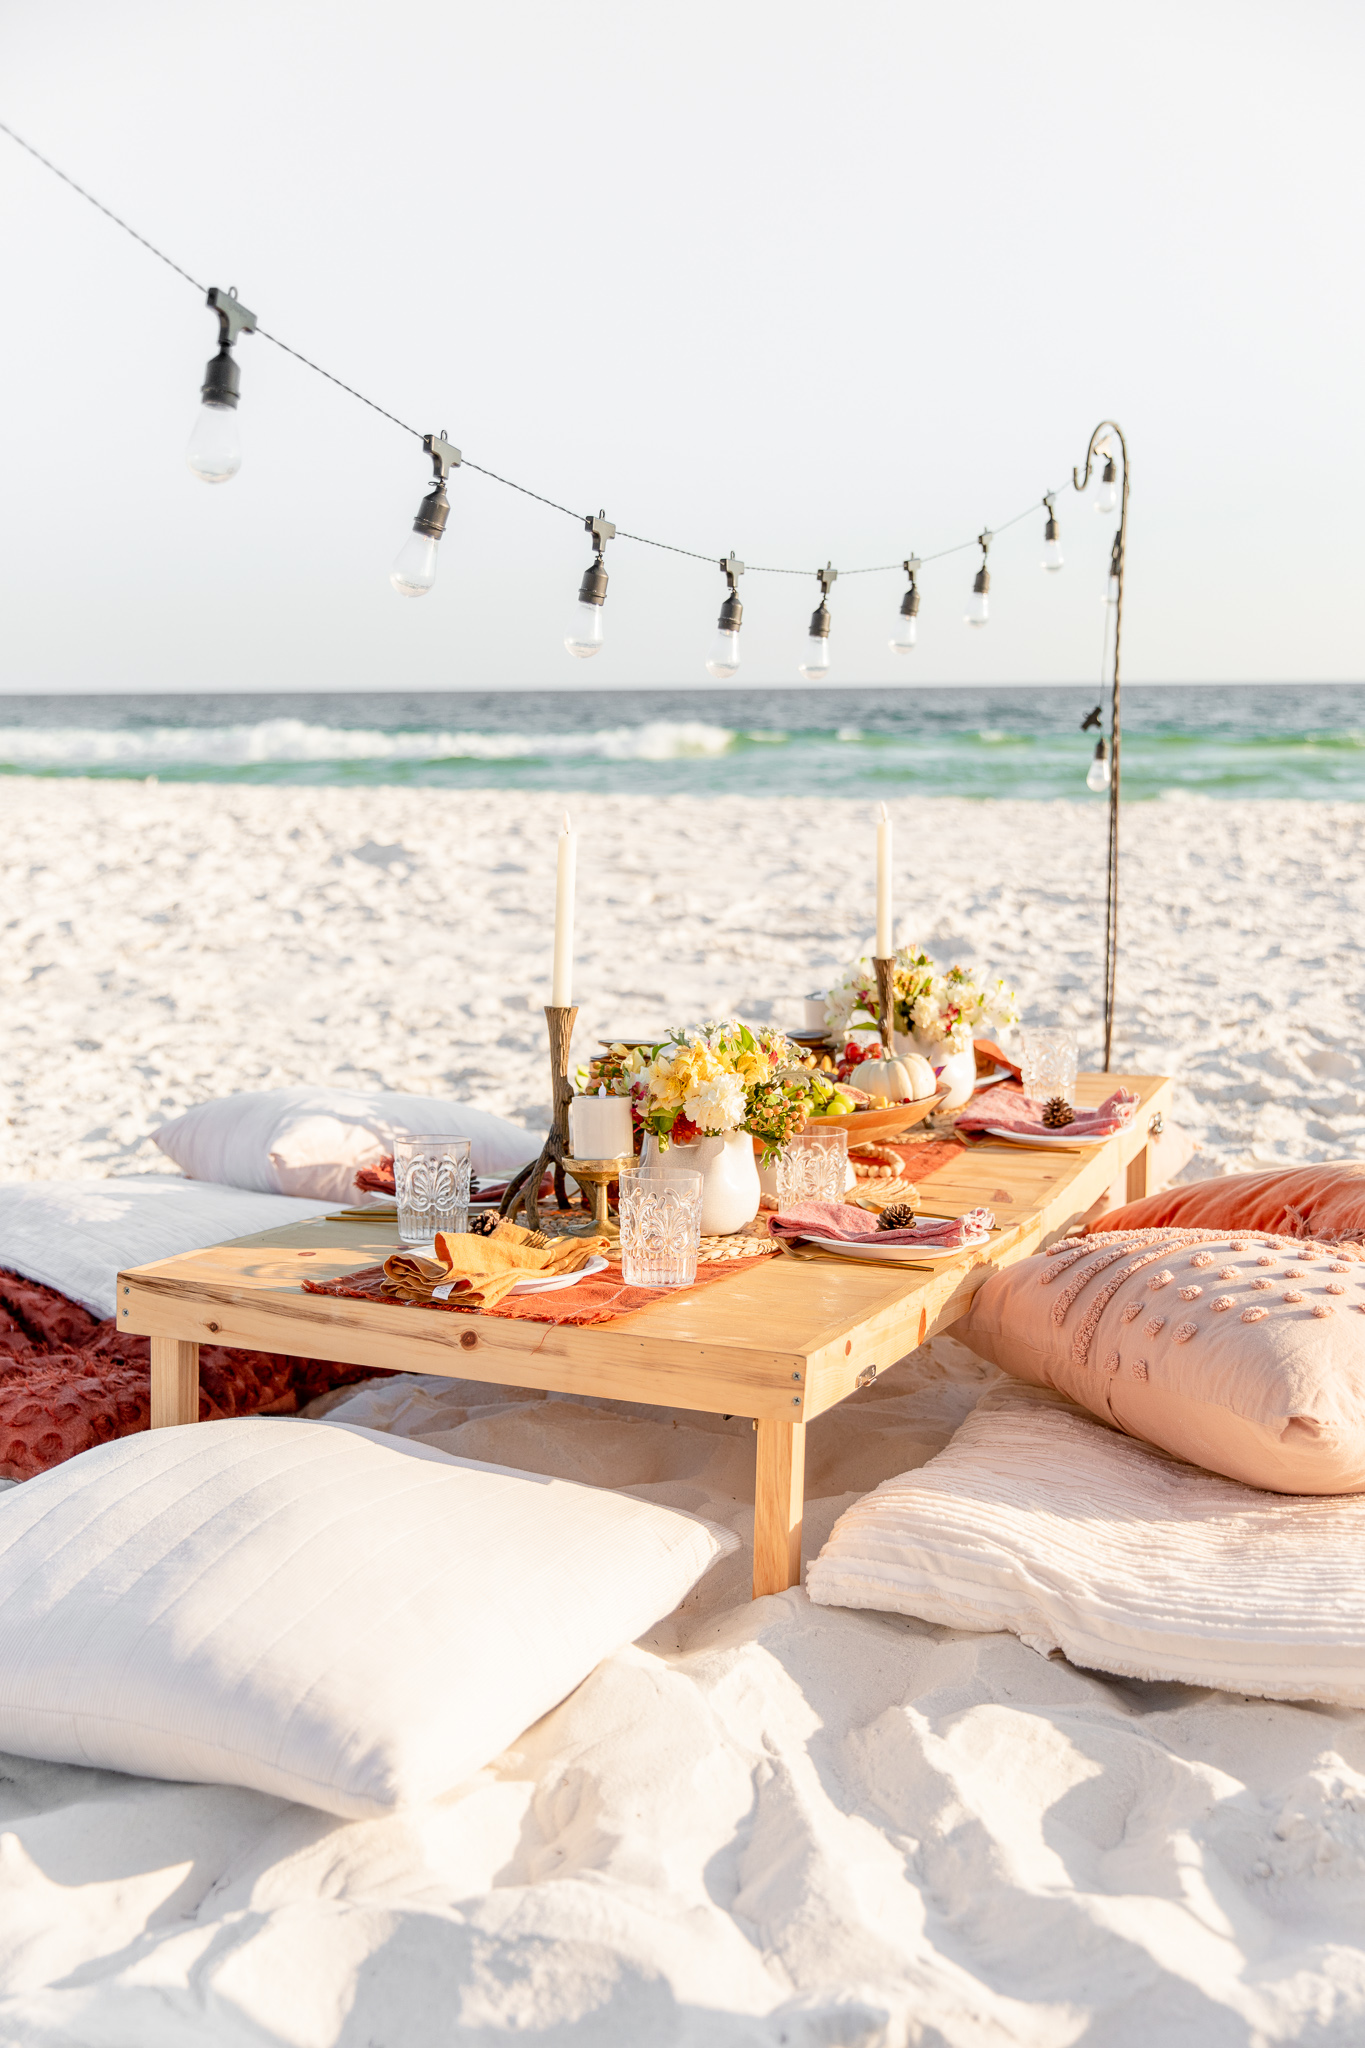 Beach Picnic Ideas That Will Keep Everyone Entertained